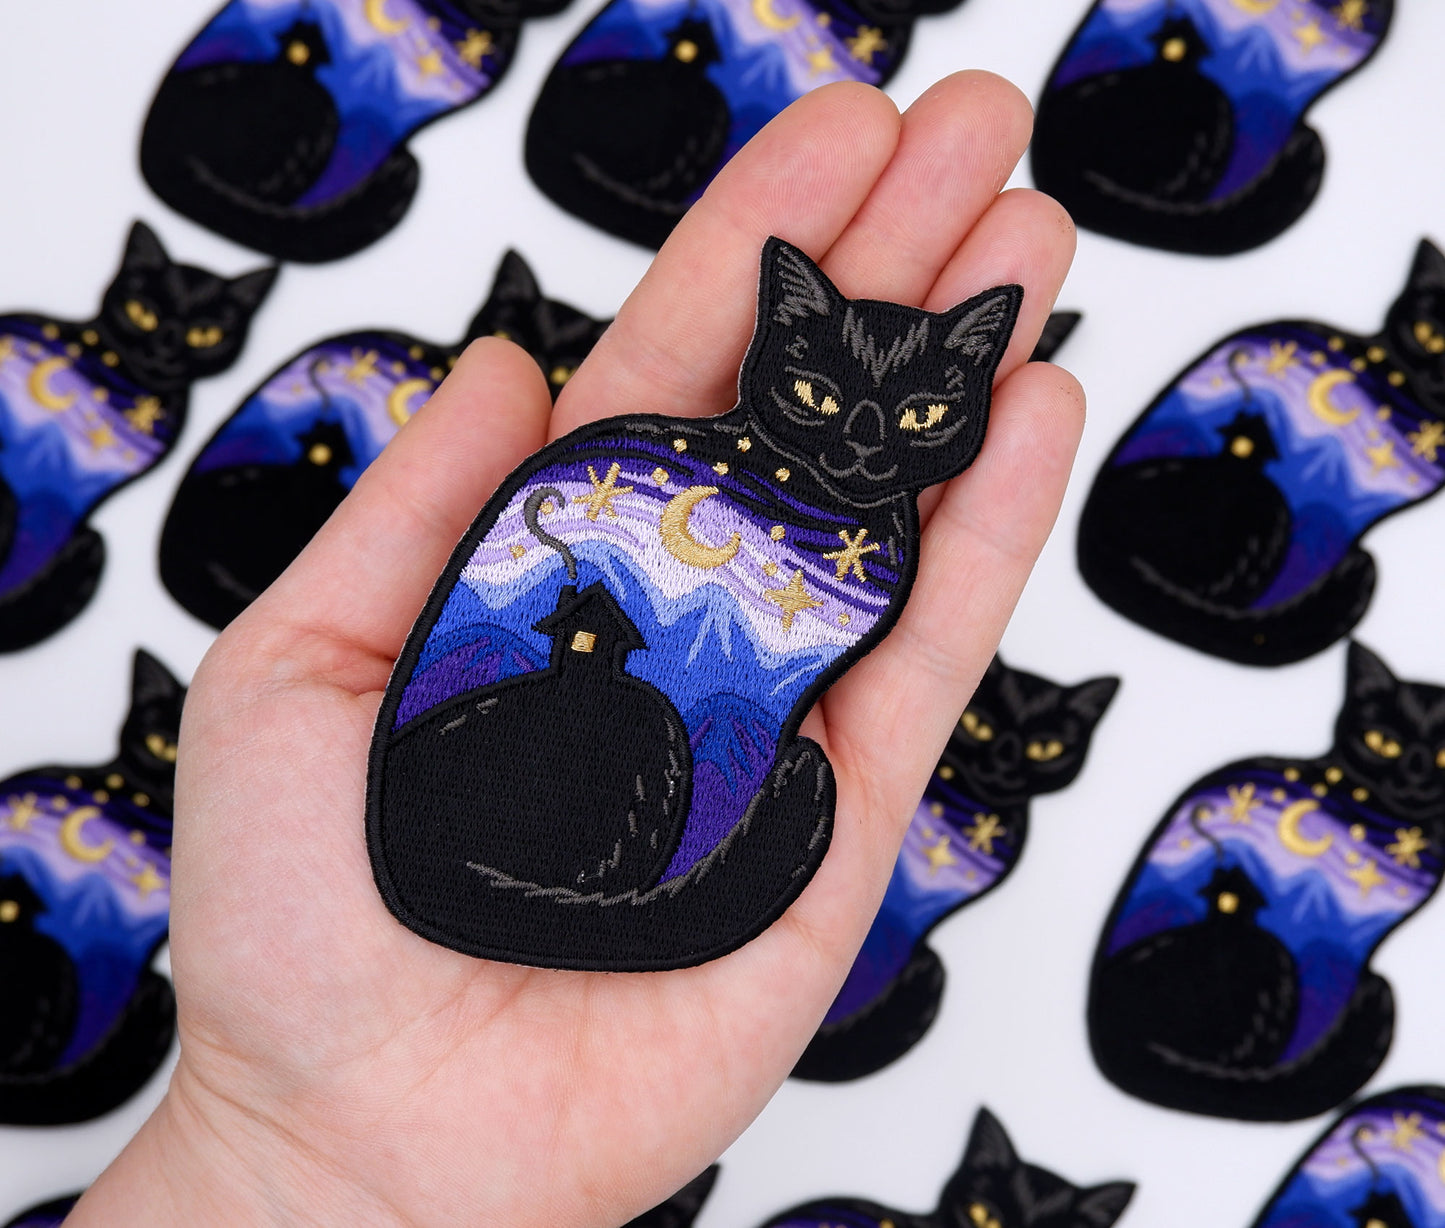 Twilight Cat - Embroidered Patch